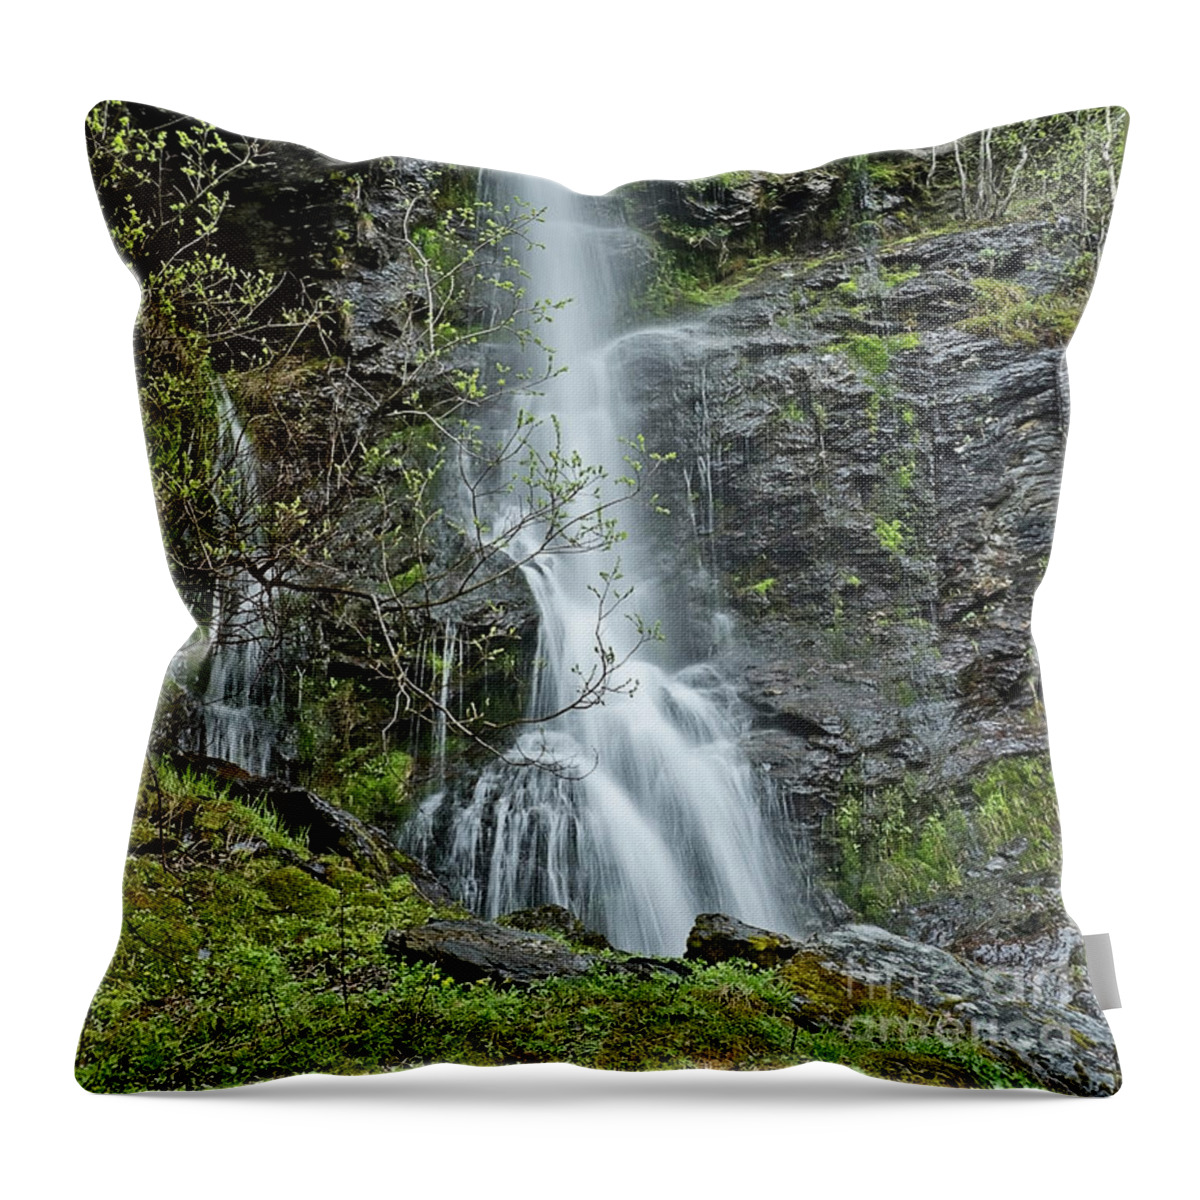 Waterfall Shape Spring Cliffs Near Flam Norway May Vivid Green Foliage Trees Streams Cheer Cheerful Glory Impressionistic Beautiful Wonderful Beauty Exciting Landscape Mindfulness Relaxation Relaxing Contemporary Unwinding Restful Calm Happy Light-hearten Serene Tranquil Tranquillity Stylish Exceptional Singular Remarkable Special Eccentric Electrifying Striking Joy Joyful Stimulating Euphoric Sensational Thrilling Atmospheric Aesthetic Charming Attractive Radiant Glorious Sentimental Falling Throw Pillow featuring the photograph Waterfall spring FLAM, NORWAY, MAY by Tatiana Bogracheva